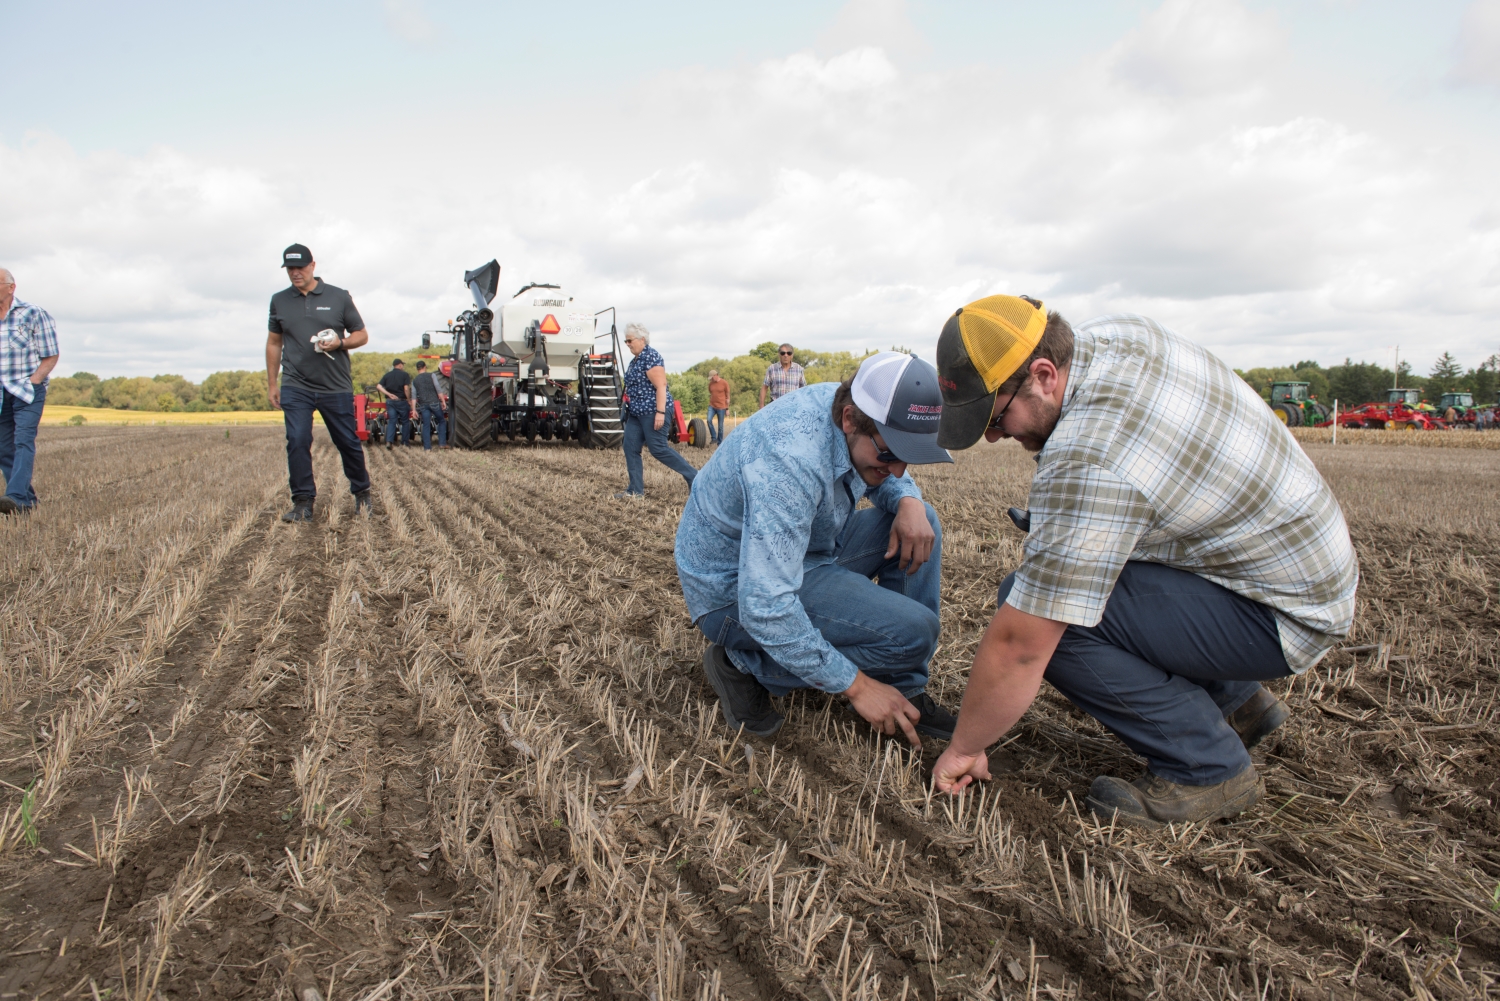 Eastern Canada’s largest outdoor farm show to feature hands-on experiences and new technology